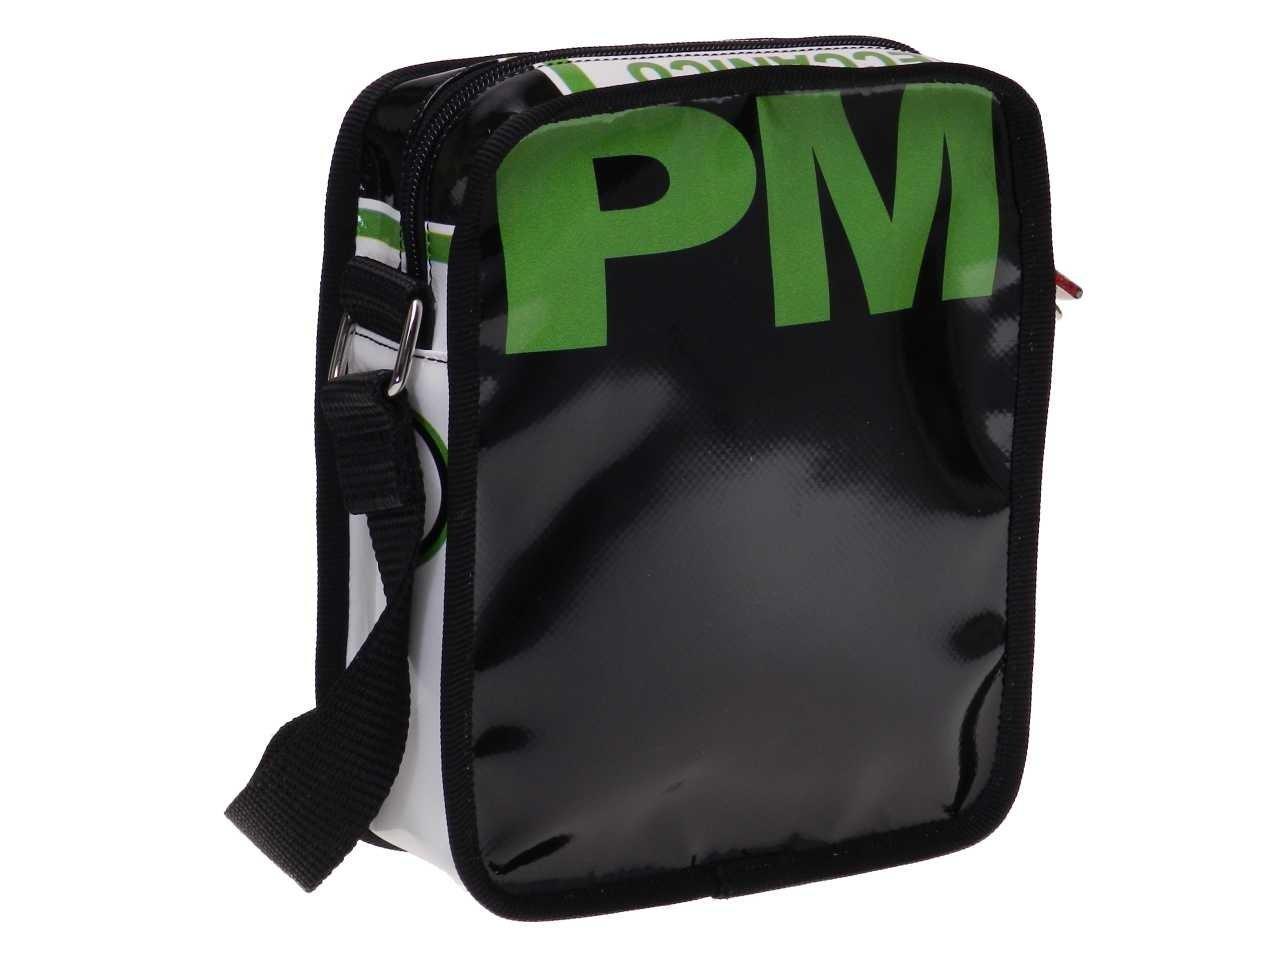 SHOULDER BAG WHITE, BLACK AND GREEN COLOURS. STRATOS MODEL MADE OF LORRY TARPAULIN. - Limited Edition Paul Meccanico